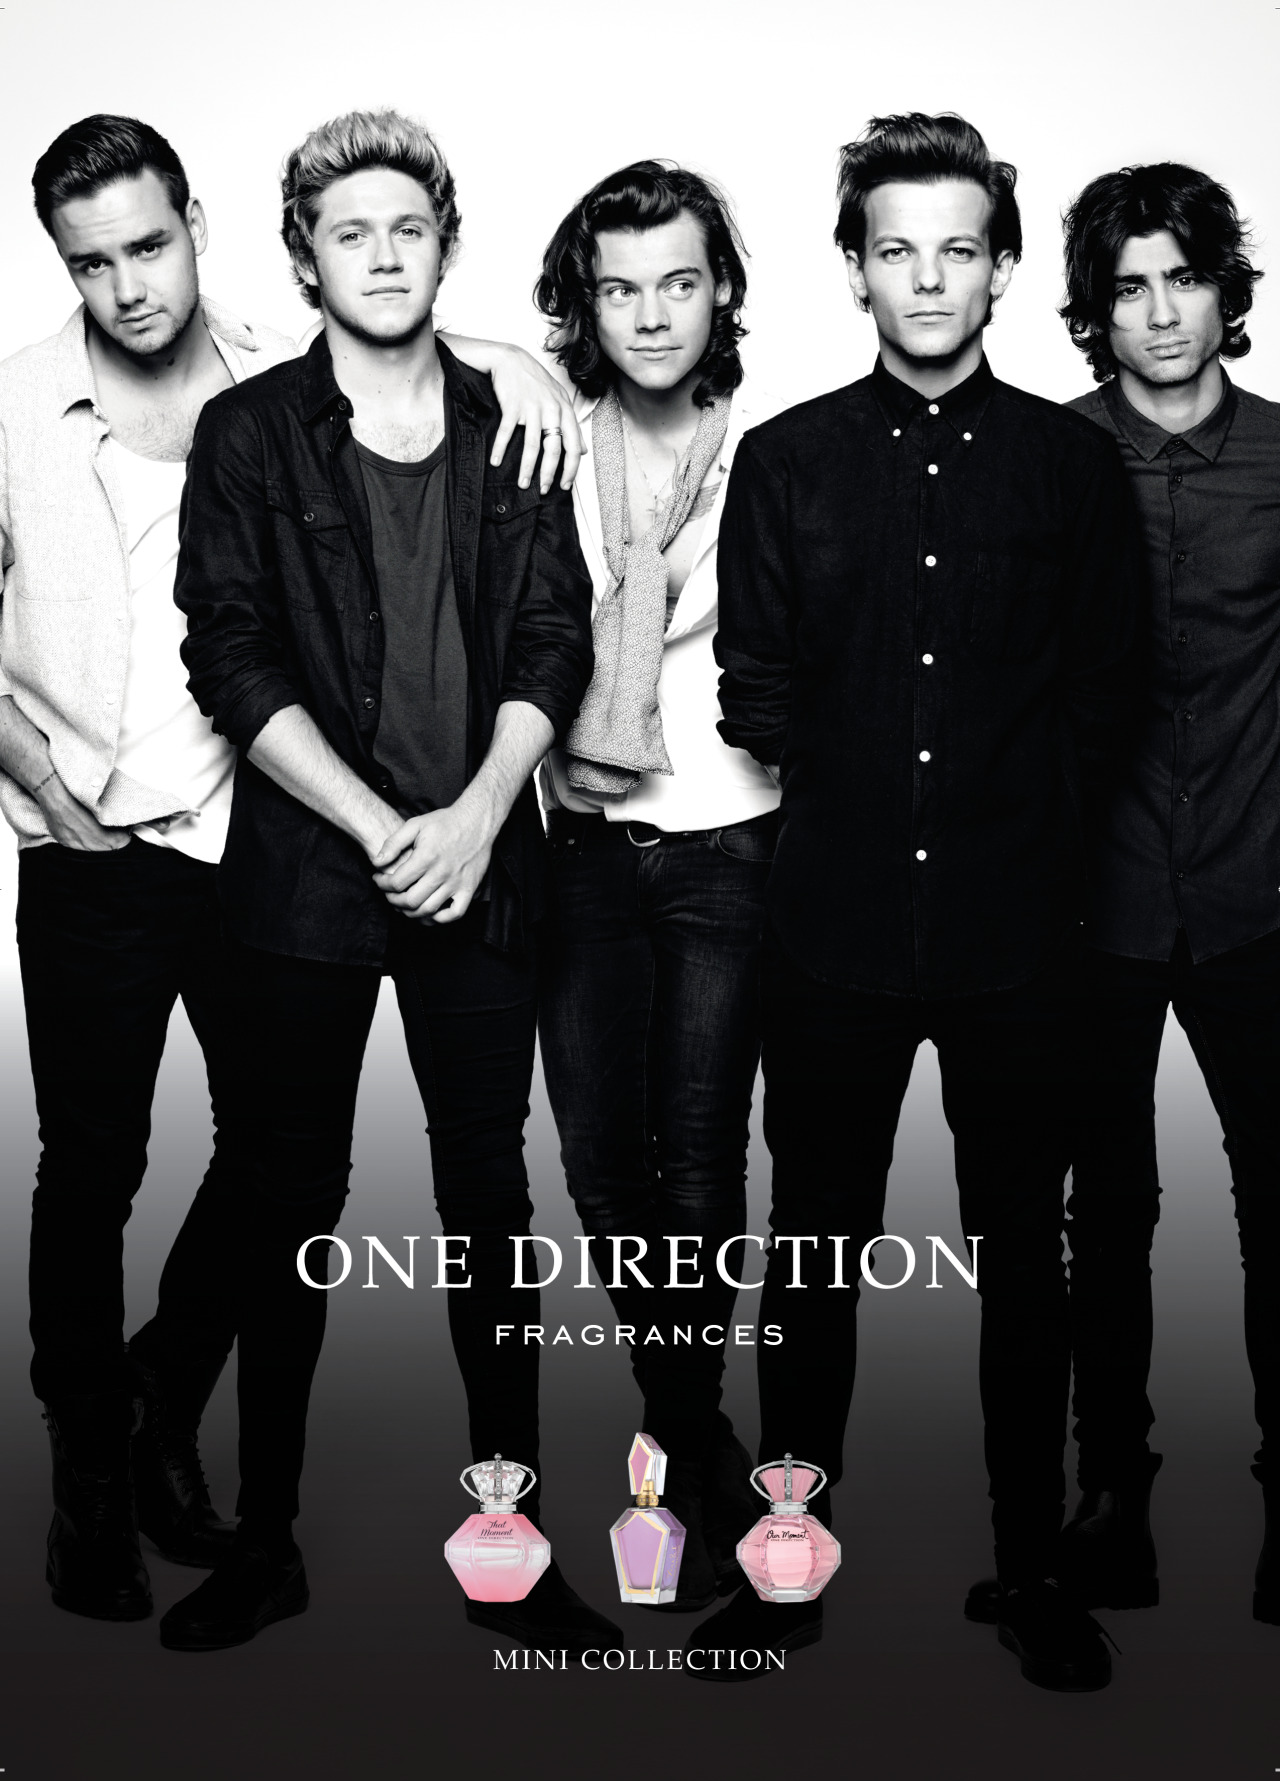 One Direction Mini Fragrance Collection See The Bands Last Ad With